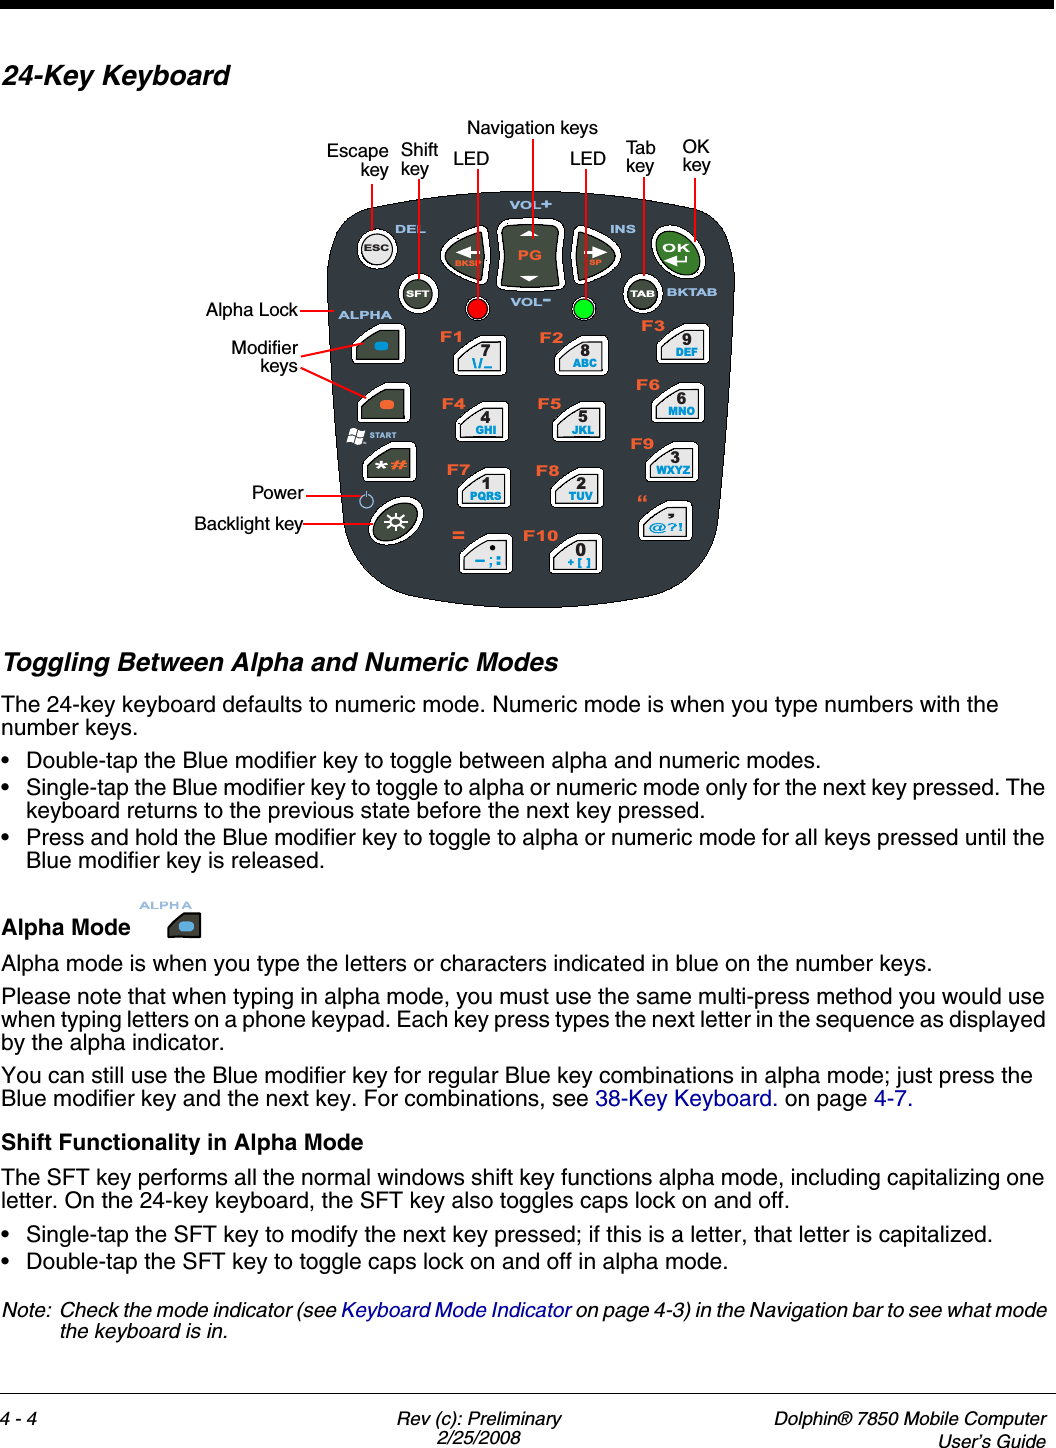 4 - 4 Rev (c): Preliminary2/25/2008Dolphin® 7850 Mobile ComputerUser’s Guide24-Key KeyboardToggling Between Alpha and Numeric ModesThe 24-key keyboard defaults to numeric mode. Numeric mode is when you type numbers with the number keys. • Double-tap the Blue modifier key to toggle between alpha and numeric modes.• Single-tap the Blue modifier key to toggle to alpha or numeric mode only for the next key pressed. The keyboard returns to the previous state before the next key pressed.• Press and hold the Blue modifier key to toggle to alpha or numeric mode for all keys pressed until the Blue modifier key is released.Alpha Mode Alpha mode is when you type the letters or characters indicated in blue on the number keys.Please note that when typing in alpha mode, you must use the same multi-press method you would use when typing letters on a phone keypad. Each key press types the next letter in the sequence as displayed by the alpha indicator.You can still use the Blue modifier key for regular Blue key combinations in alpha mode; just press the Blue modifier key and the next key. For combinations, see 38-Key Keyboard. on page 4-7. Shift Functionality in Alpha ModeThe SFT key performs all the normal windows shift key functions alpha mode, including capitalizing one letter. On the 24-key keyboard, the SFT key also toggles caps lock on and off.• Single-tap the SFT key to modify the next key pressed; if this is a letter, that letter is capitalized.• Double-tap the SFT key to toggle caps lock on and off in alpha mode.Note: Check the mode indicator (see Keyboard Mode Indicator on page 4-3) in the Navigation bar to see what mode the keyboard is in.PGBKSPSPESCTABSFT74GHI1PQRS8ABC5JKL2TUV9DEF6MNO3WXYZ/\ _0+[]:–F1 F2F3F4 F5F6F7 F8F9F10VOL+DEL INSBKTABSTARTVOL-ALPHA“=PowerBacklight keyModifierkeysAlpha LockEscapekeyOK keyNavigation keysTab  keyShift key LED LED